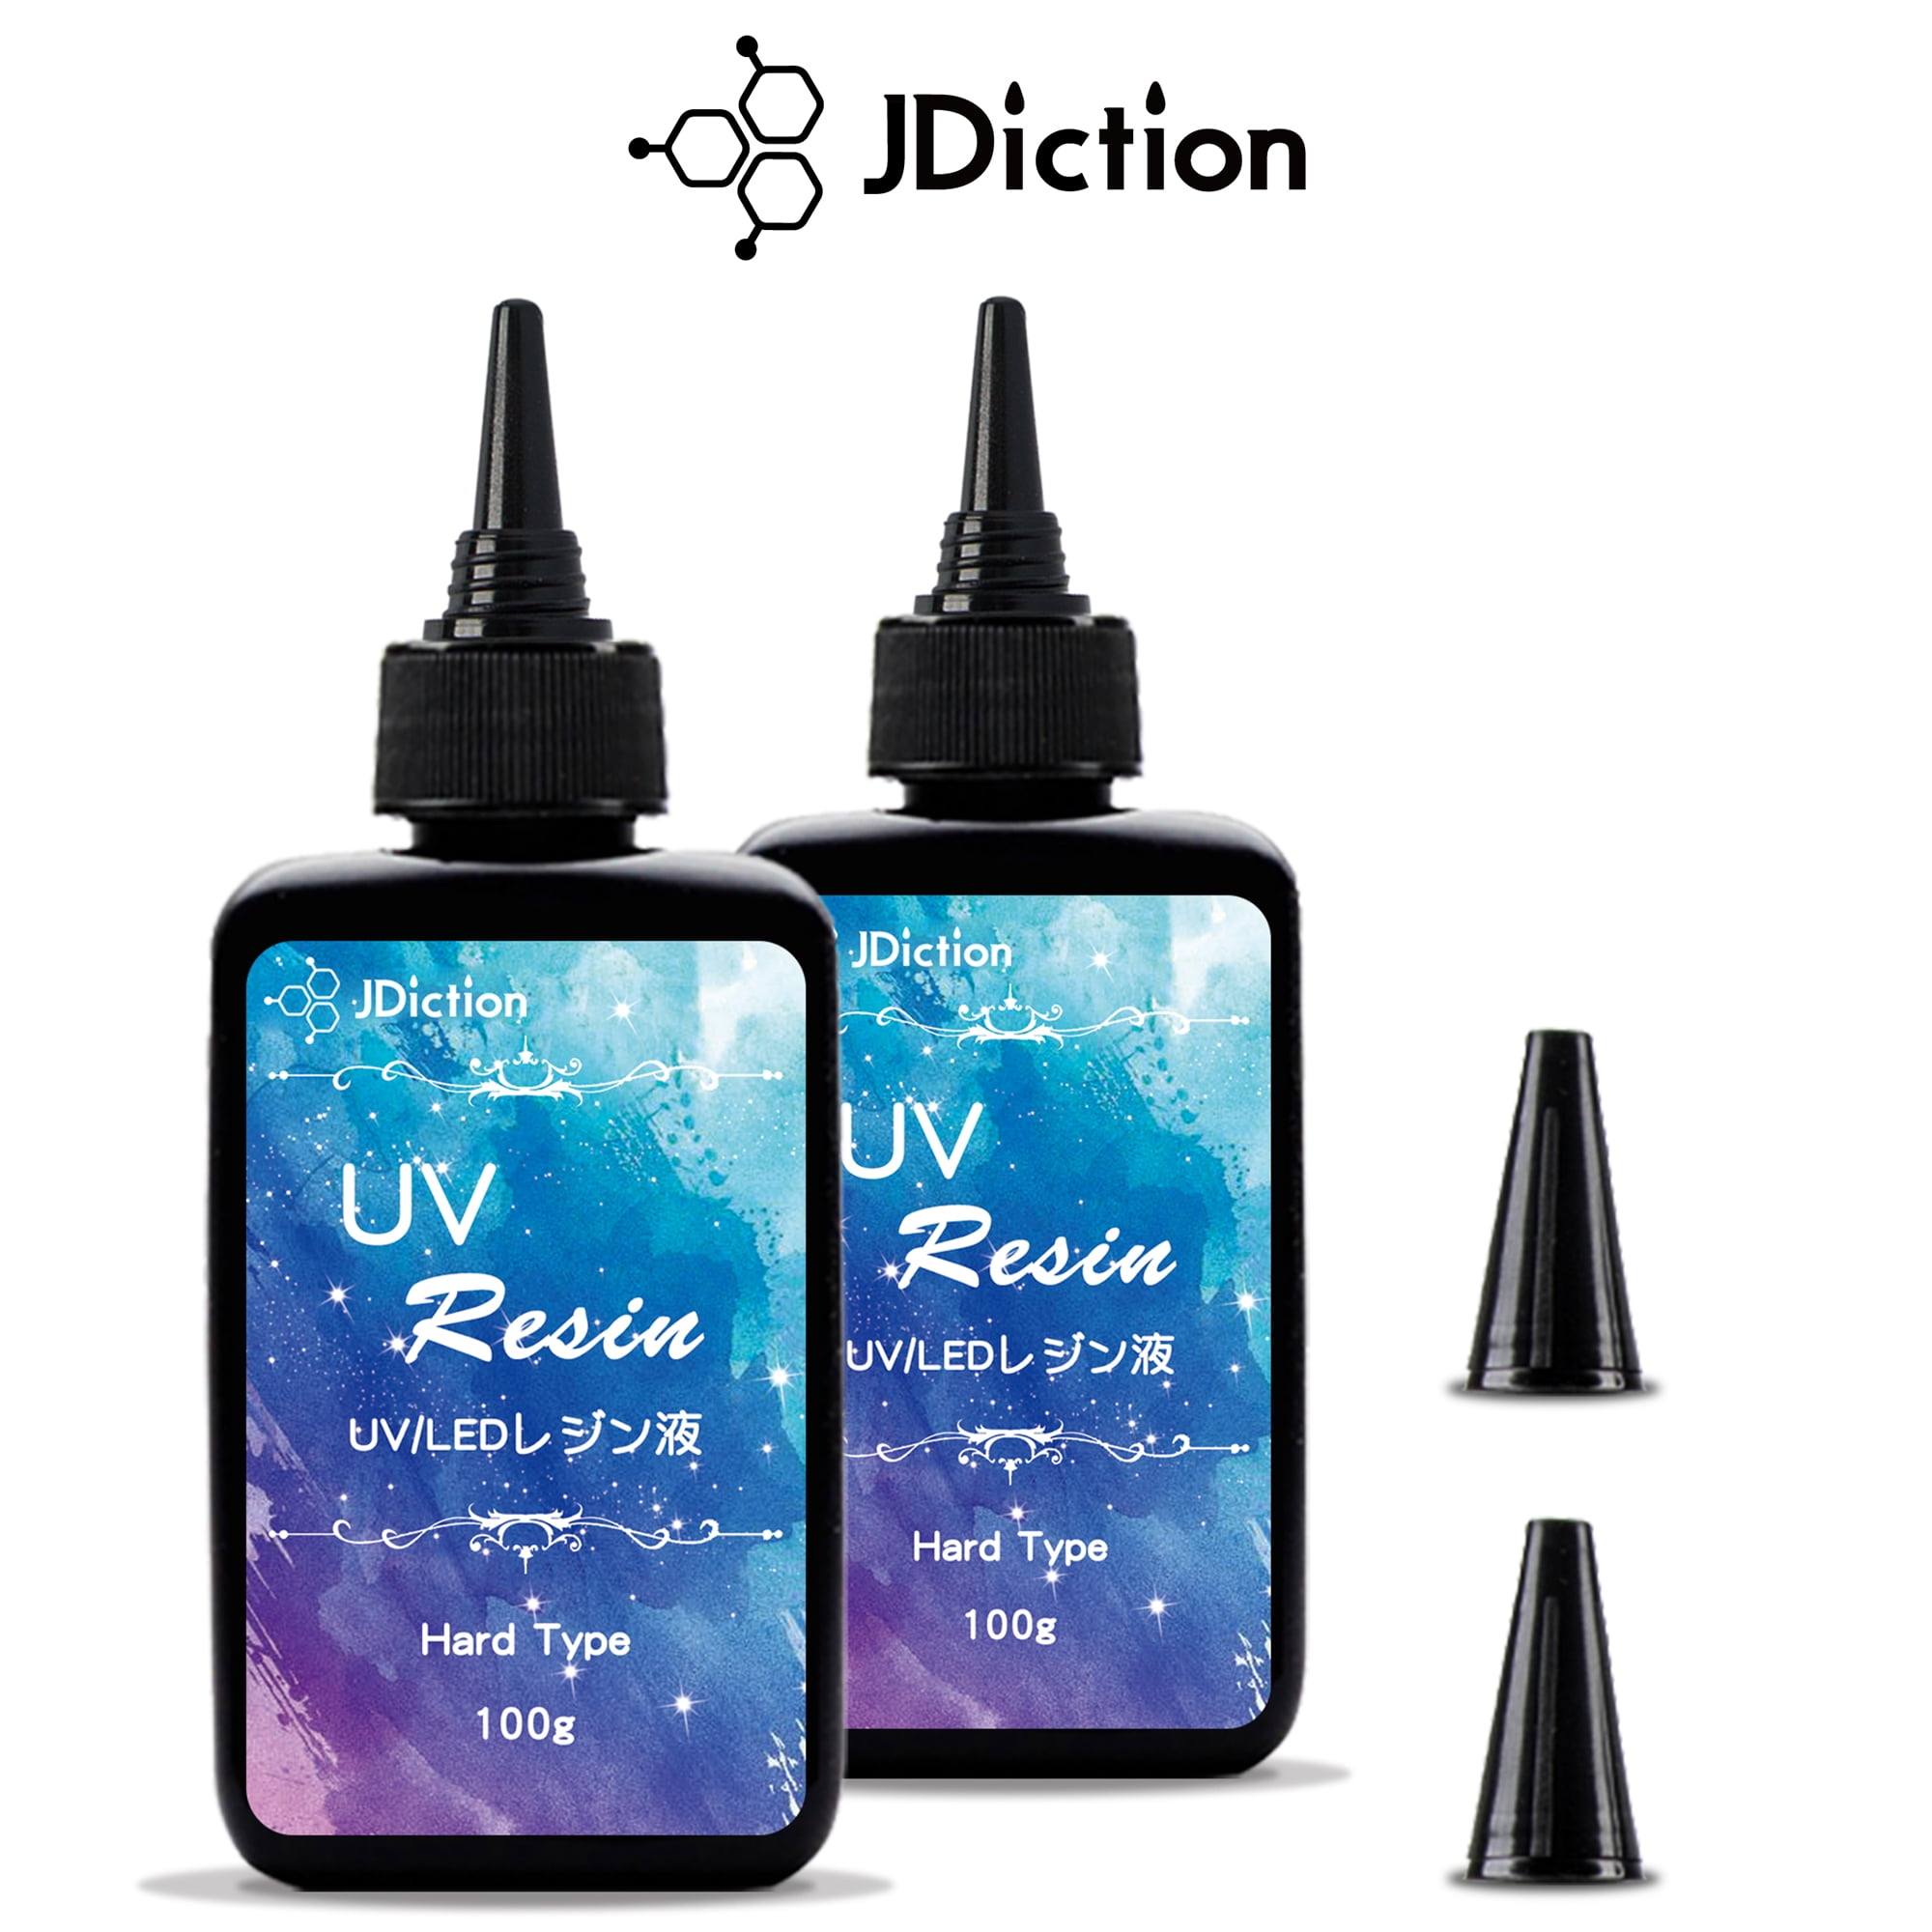 Jdiction UV Resin Kit With Light For Beginners, Unboxing Premium Quality  Resin